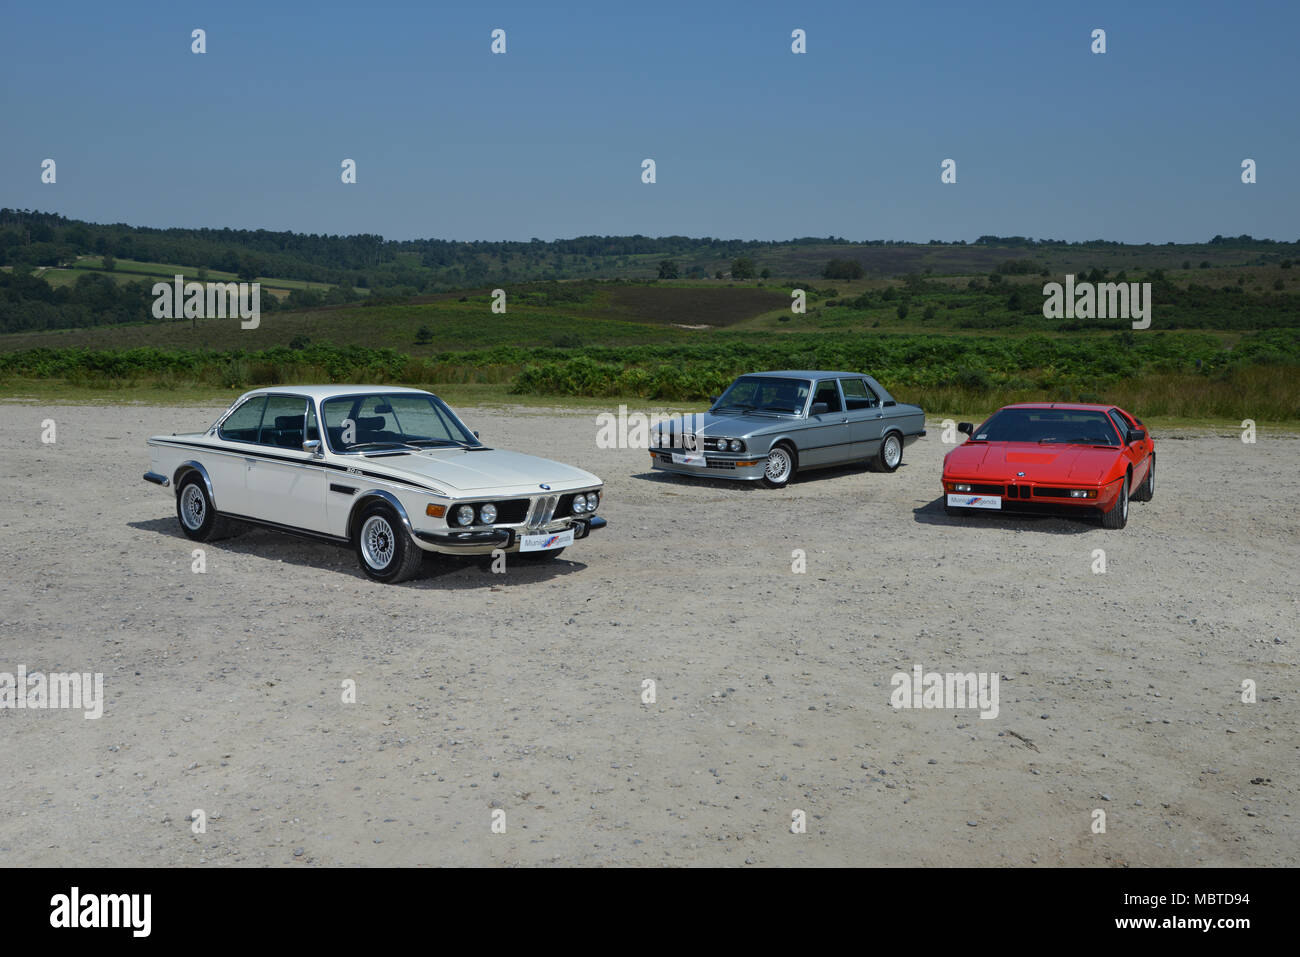 The original BMW M cars - the M1 supercar, M535i and 3.0 CSL Stock Photo